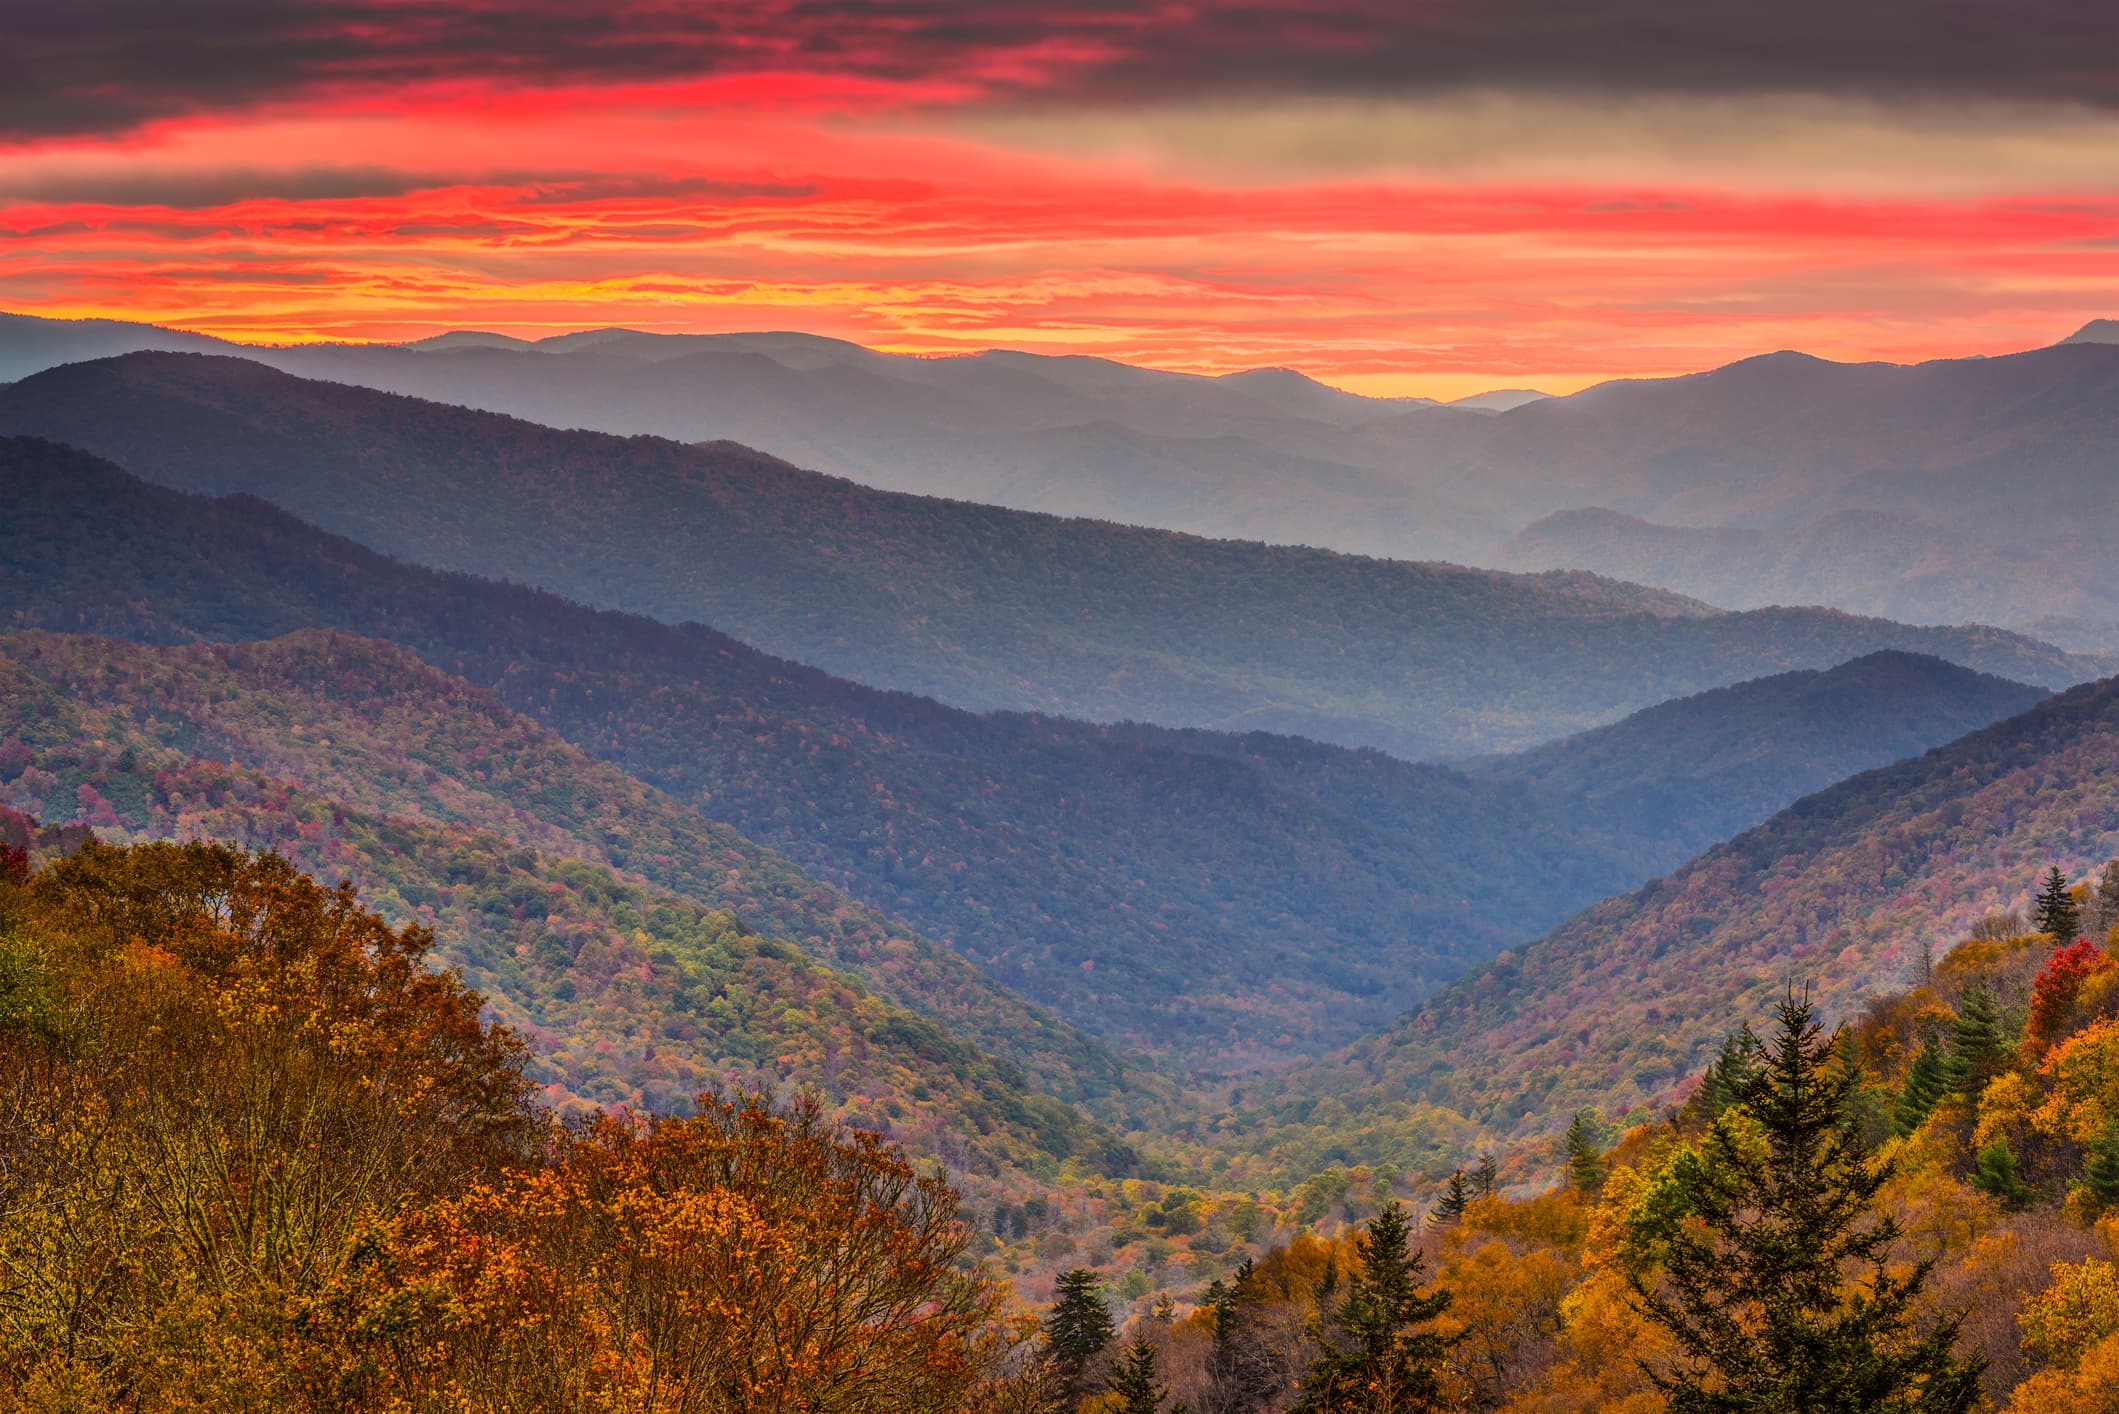 A view of the Great Smoky Mountains with autumn colors